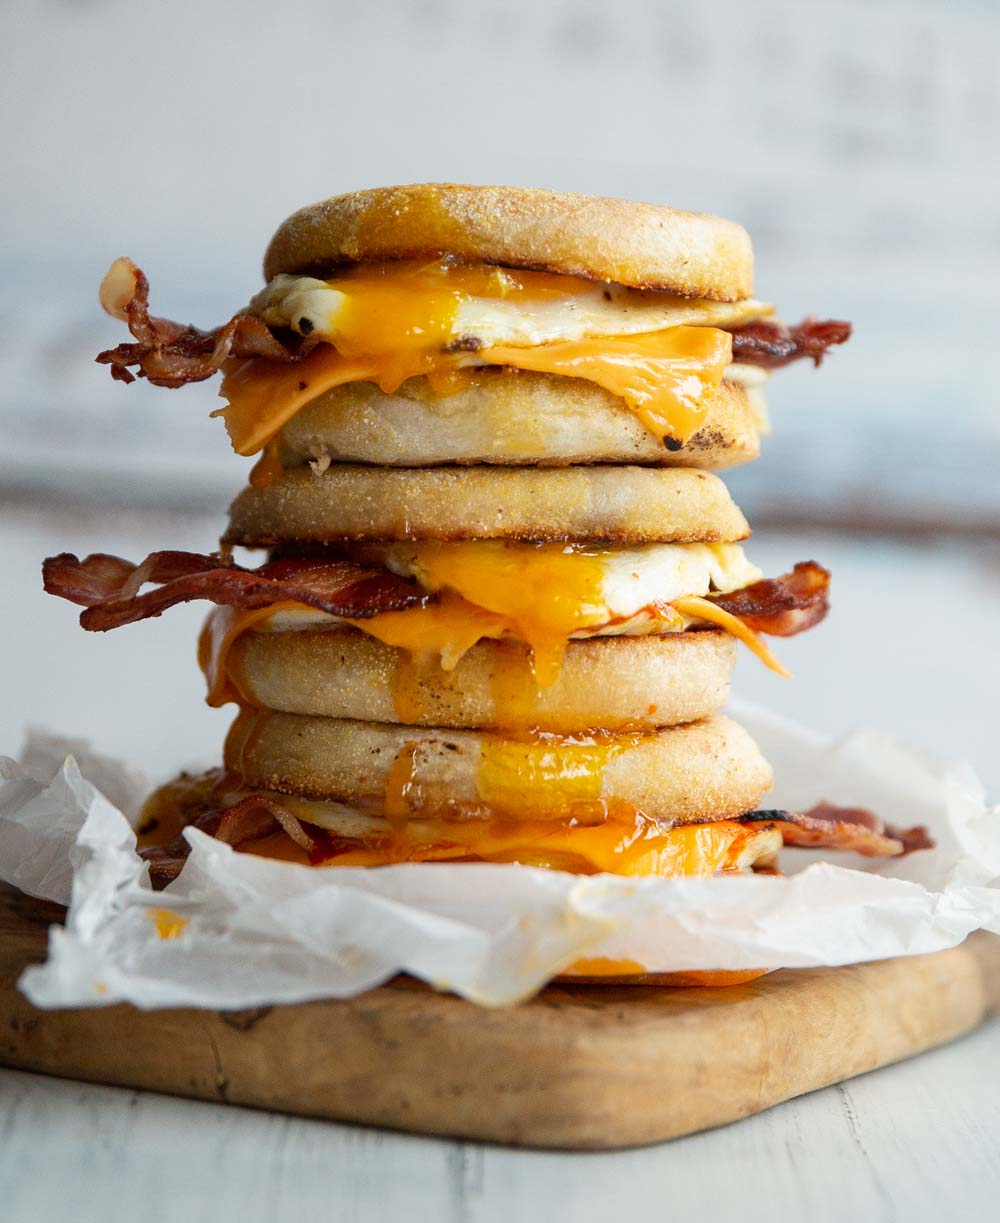 Breakfast Grill - Delicious Thick All-Day Sandwiches (One Has